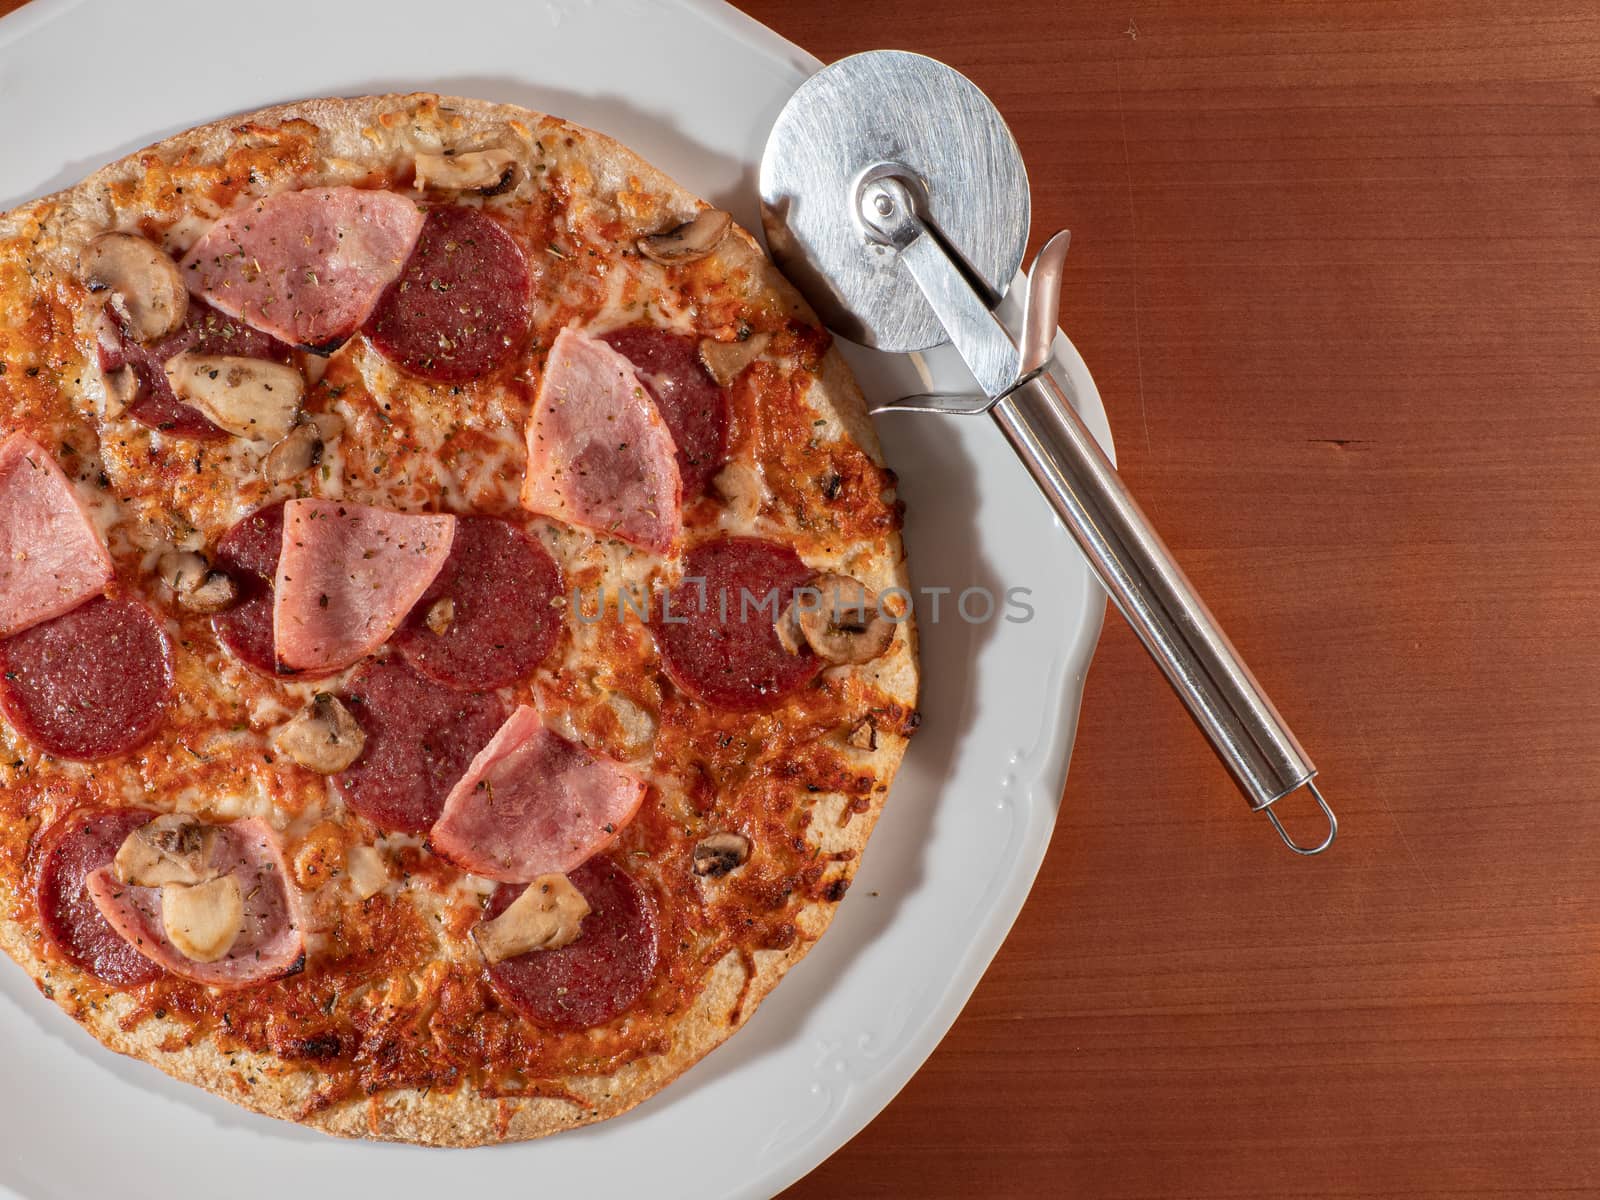 homemade pizza on white plate and wooden background overhead view